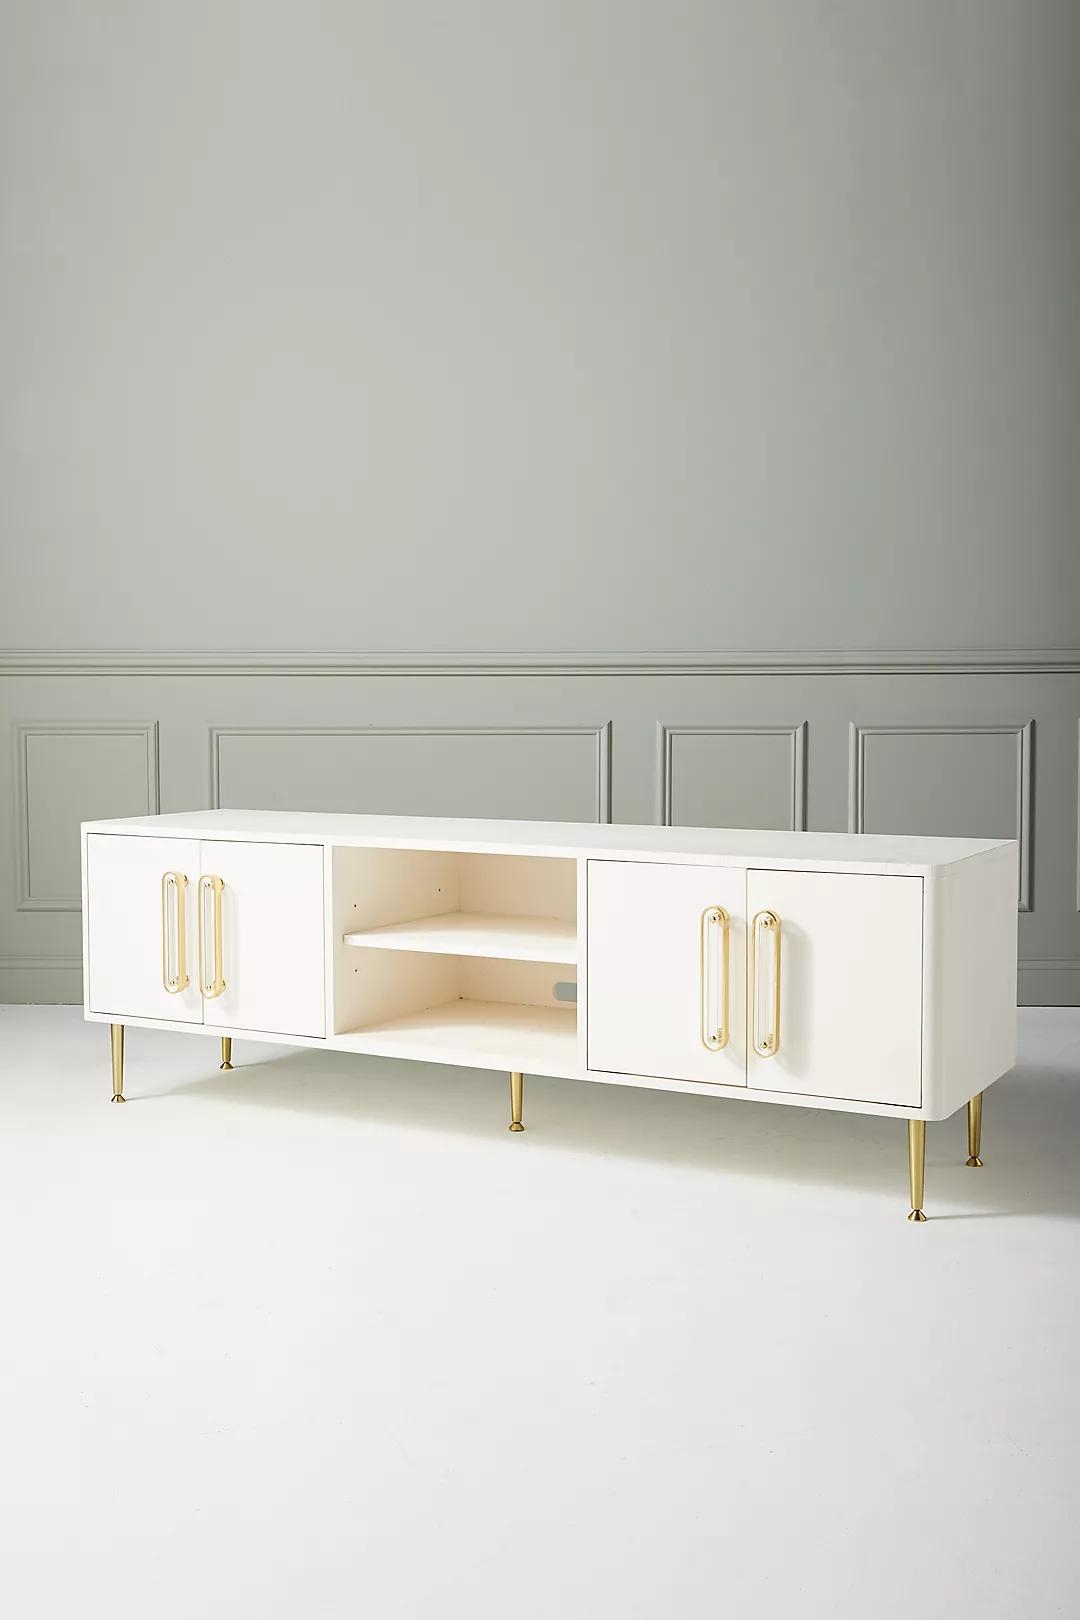 Odetta Media Console By Tracey Boyd in Beige - Image 3